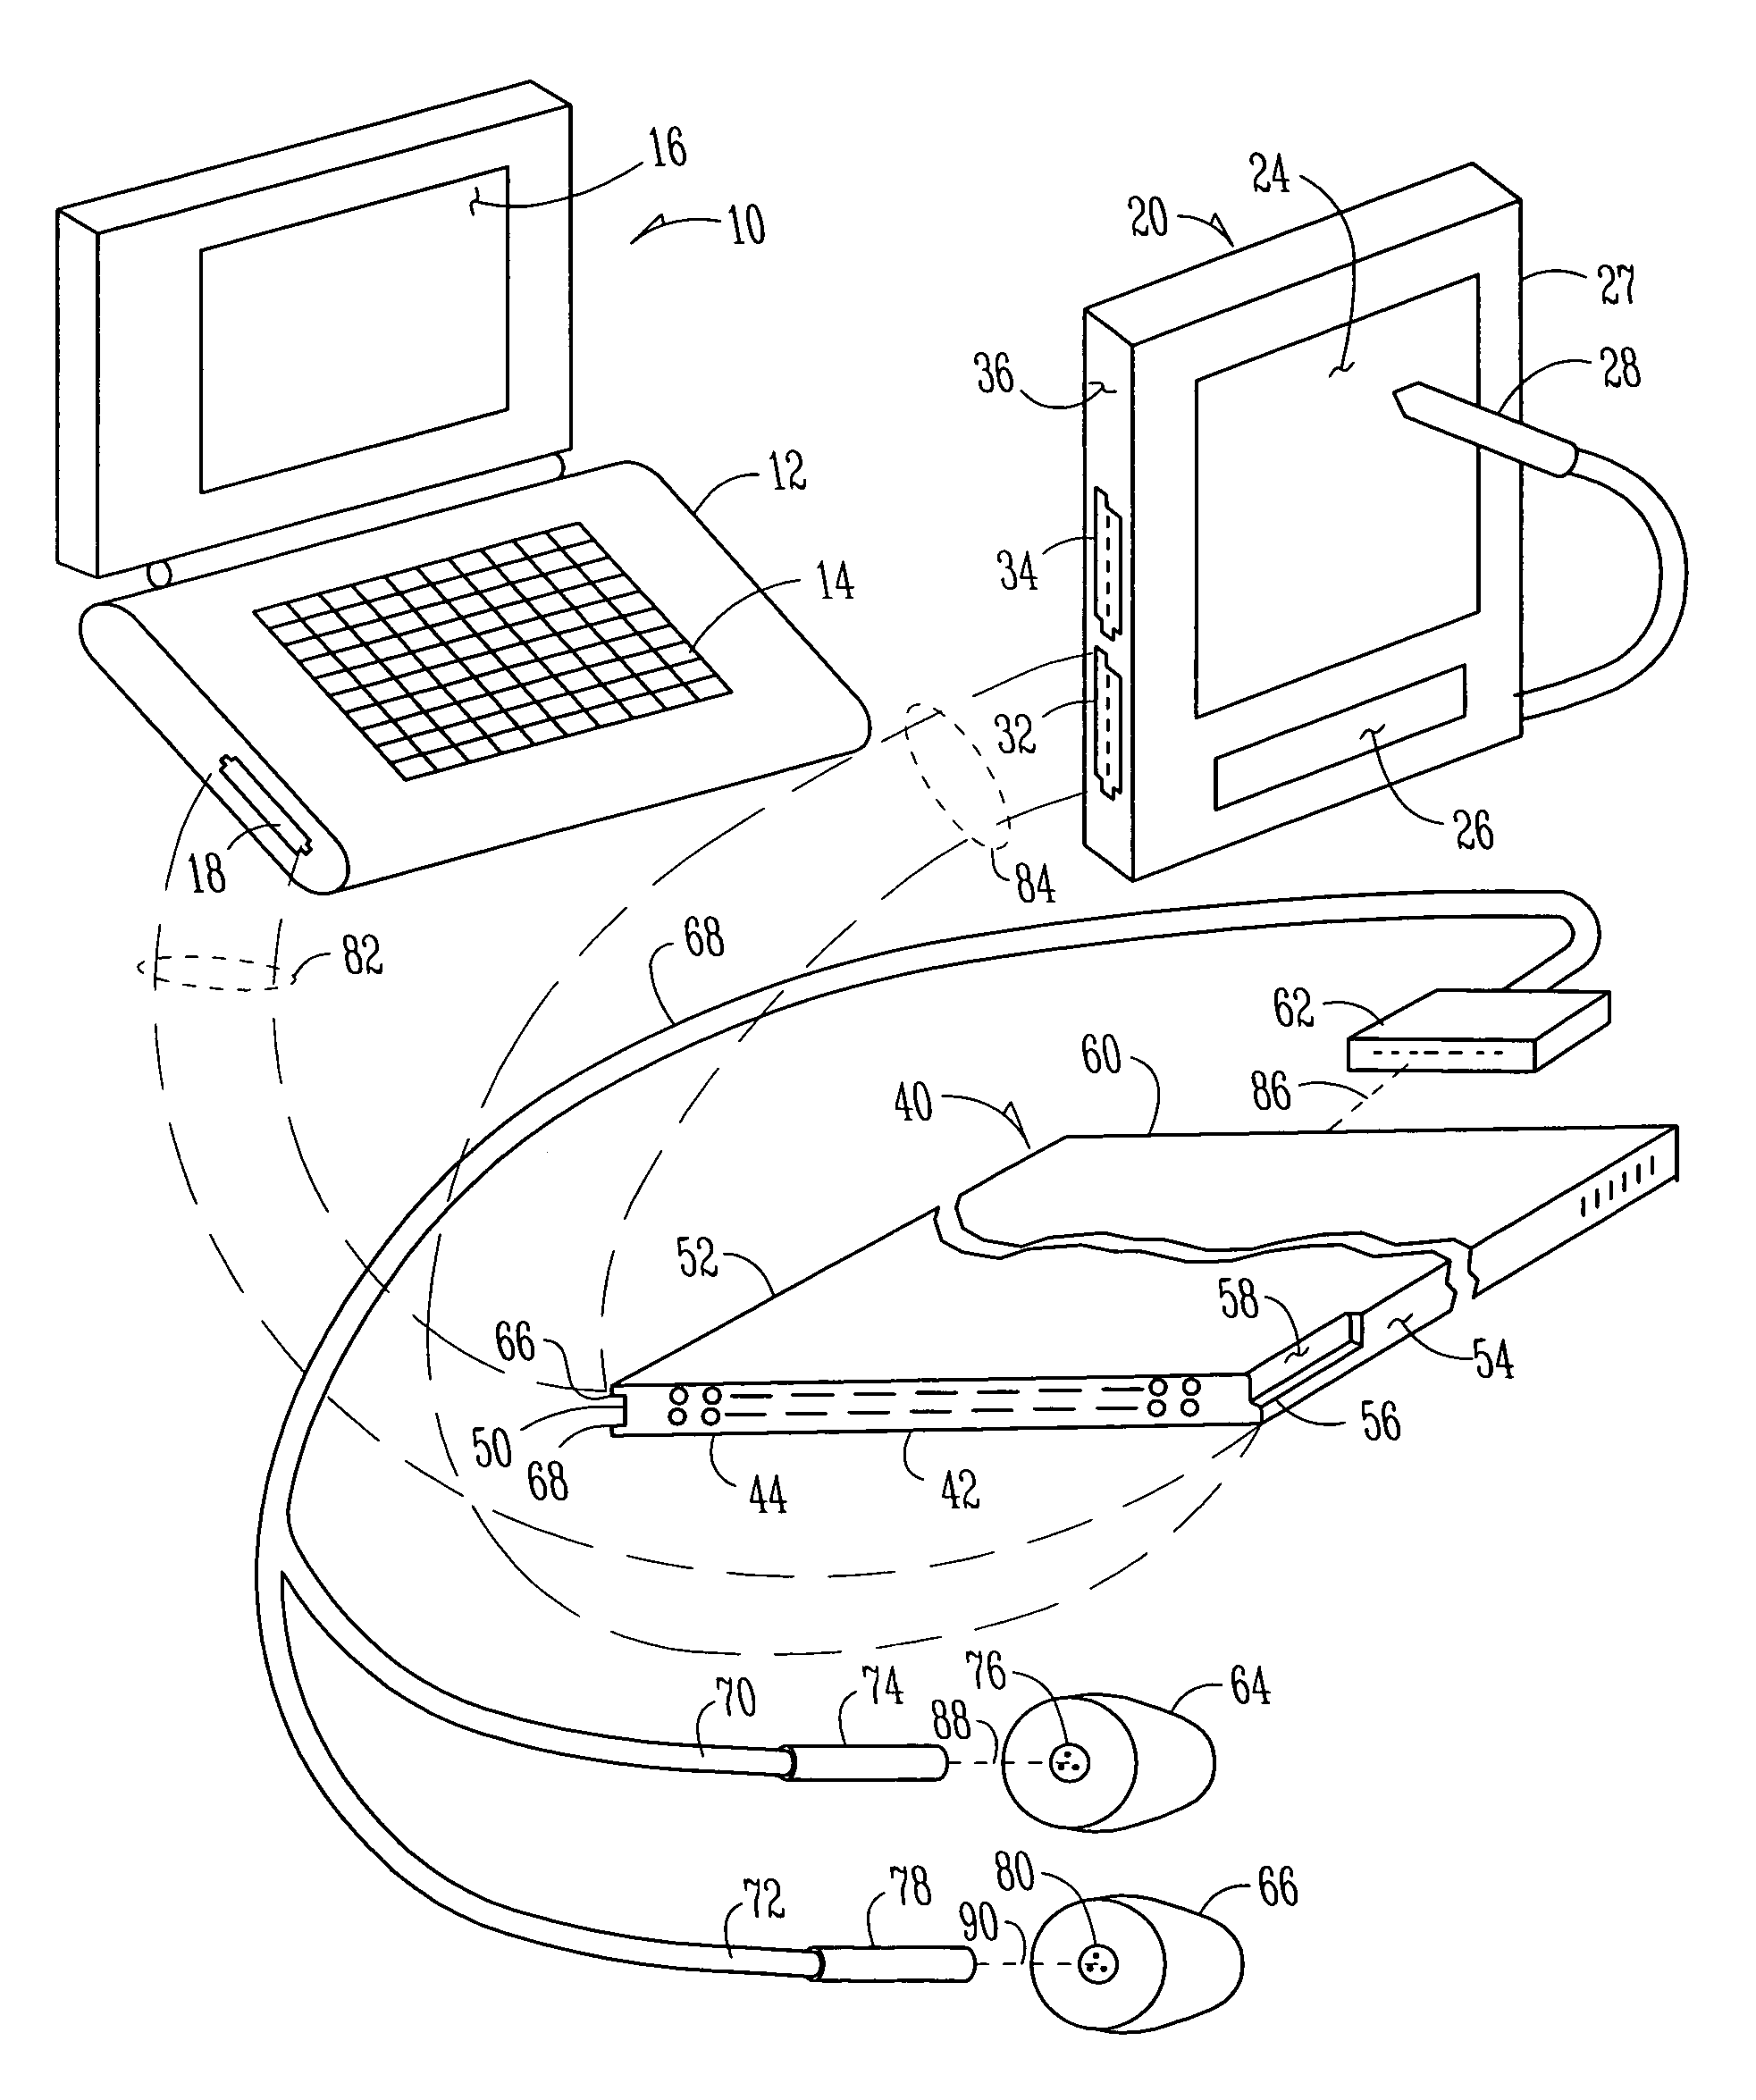 System for programming hearing aids